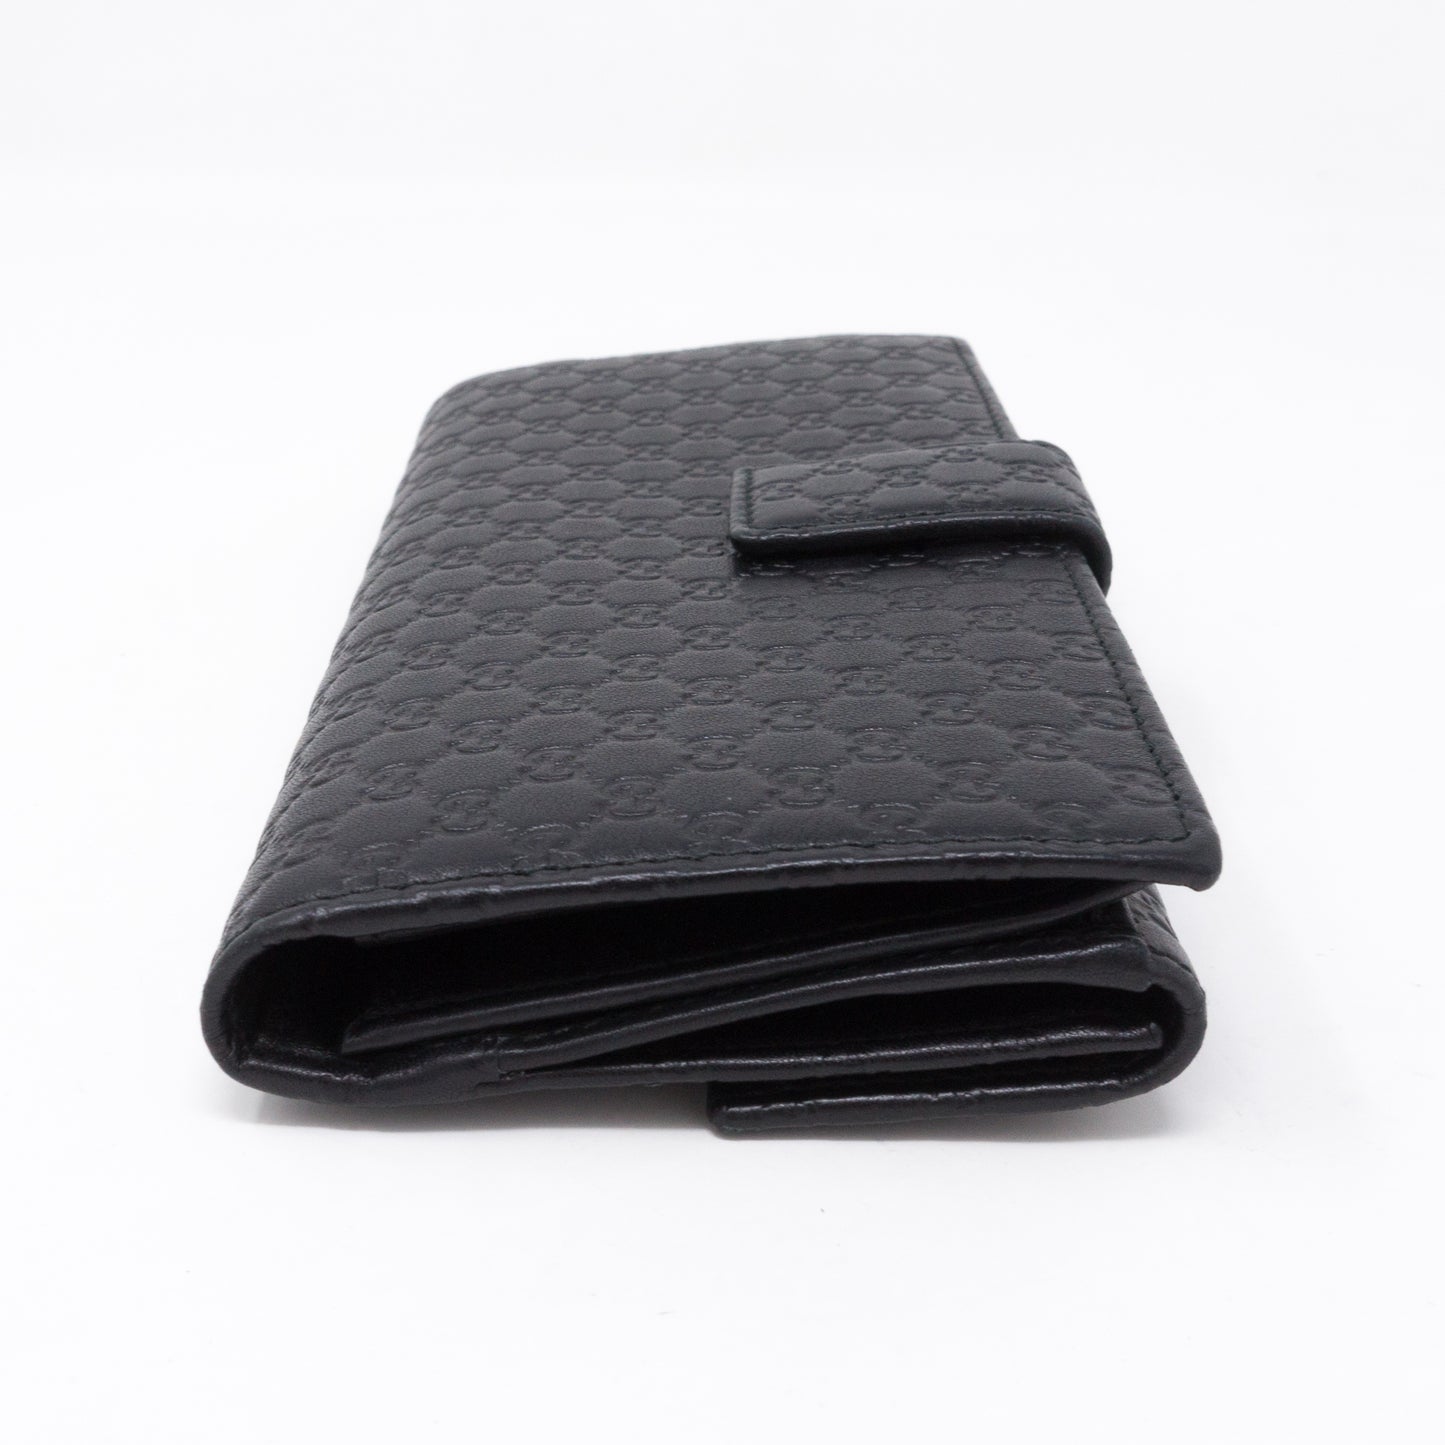 GG Continental Wallet Black Leather